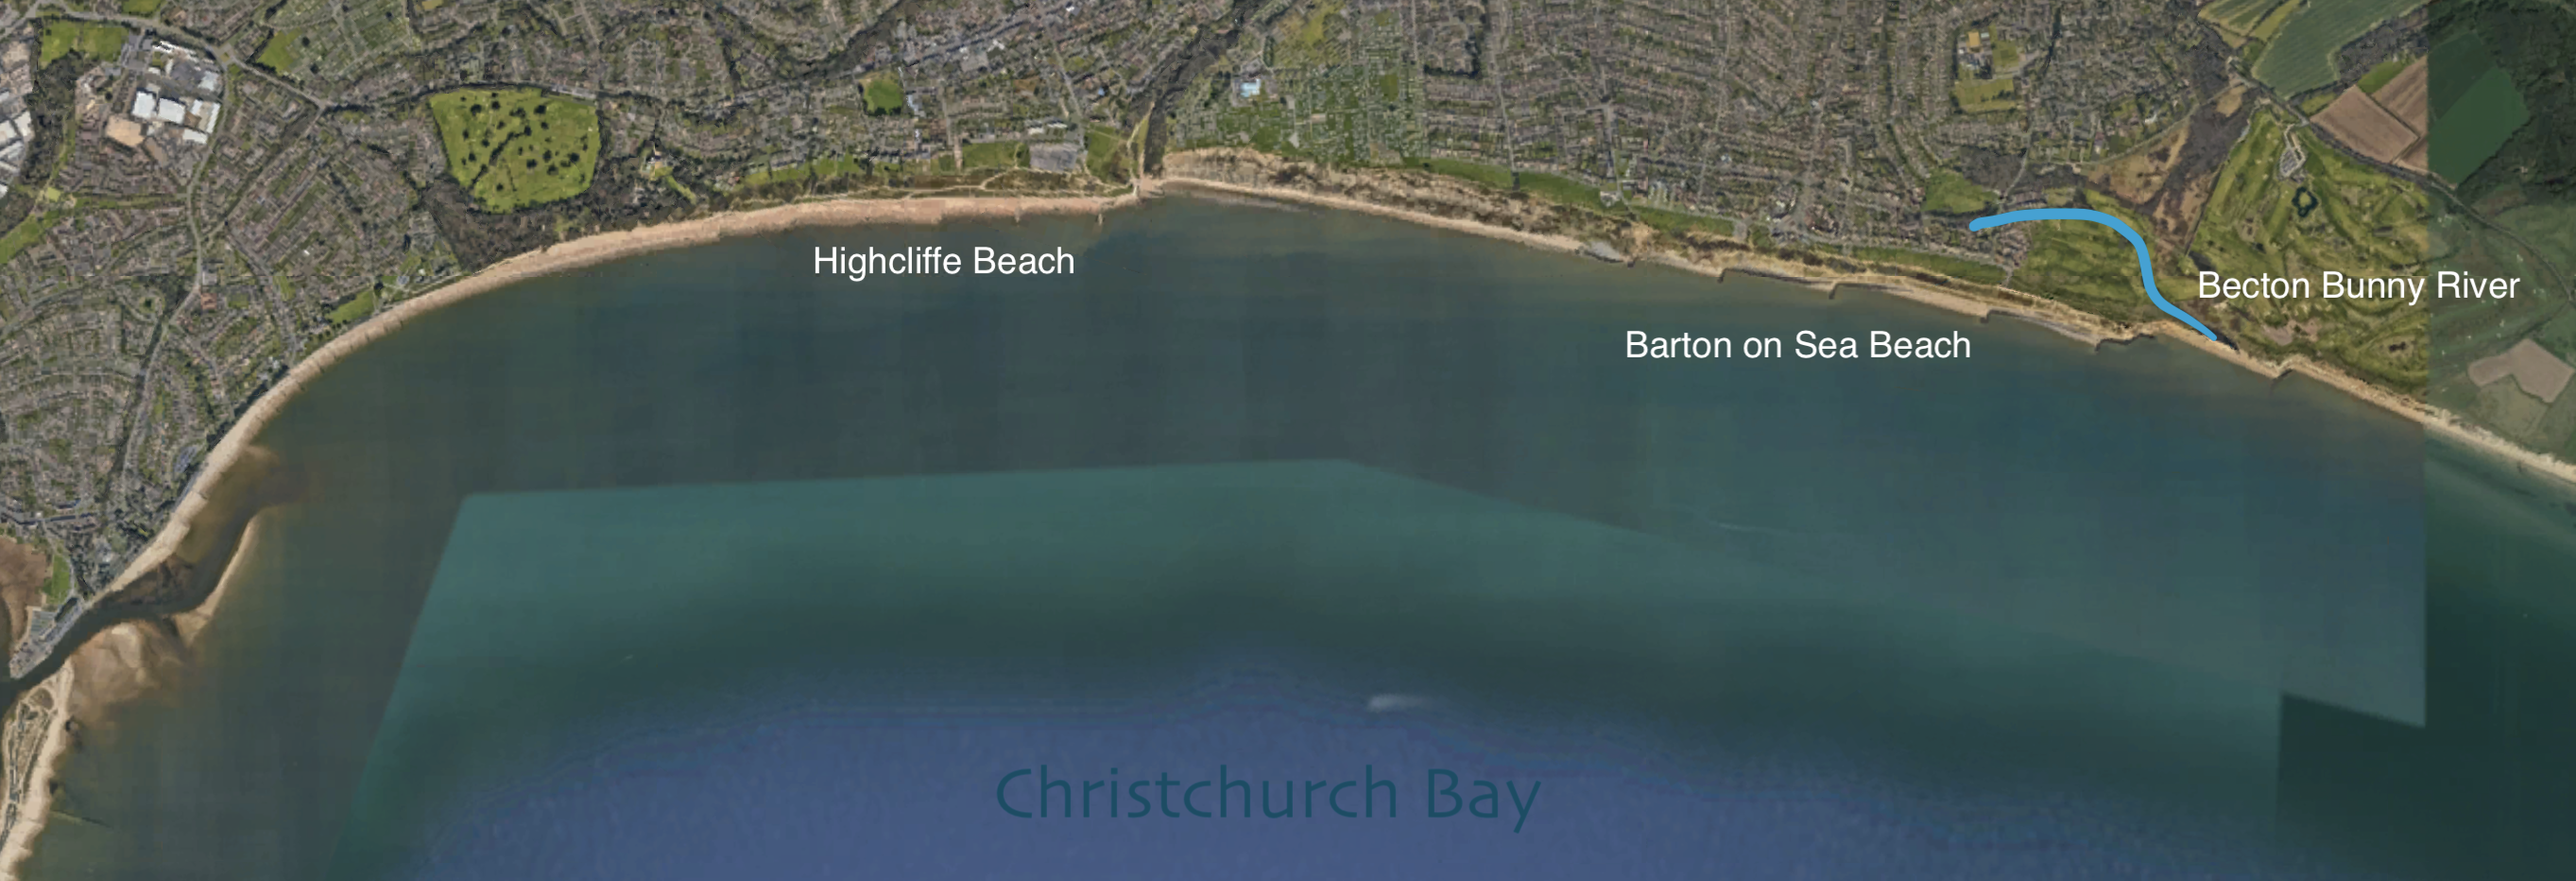 Figure 9
Image taken from google satellite imagery by Isobel Akerman. demonstrating the whole bay and the sediment starvation occurring at the east end near the mouth of Becton Bunny.
